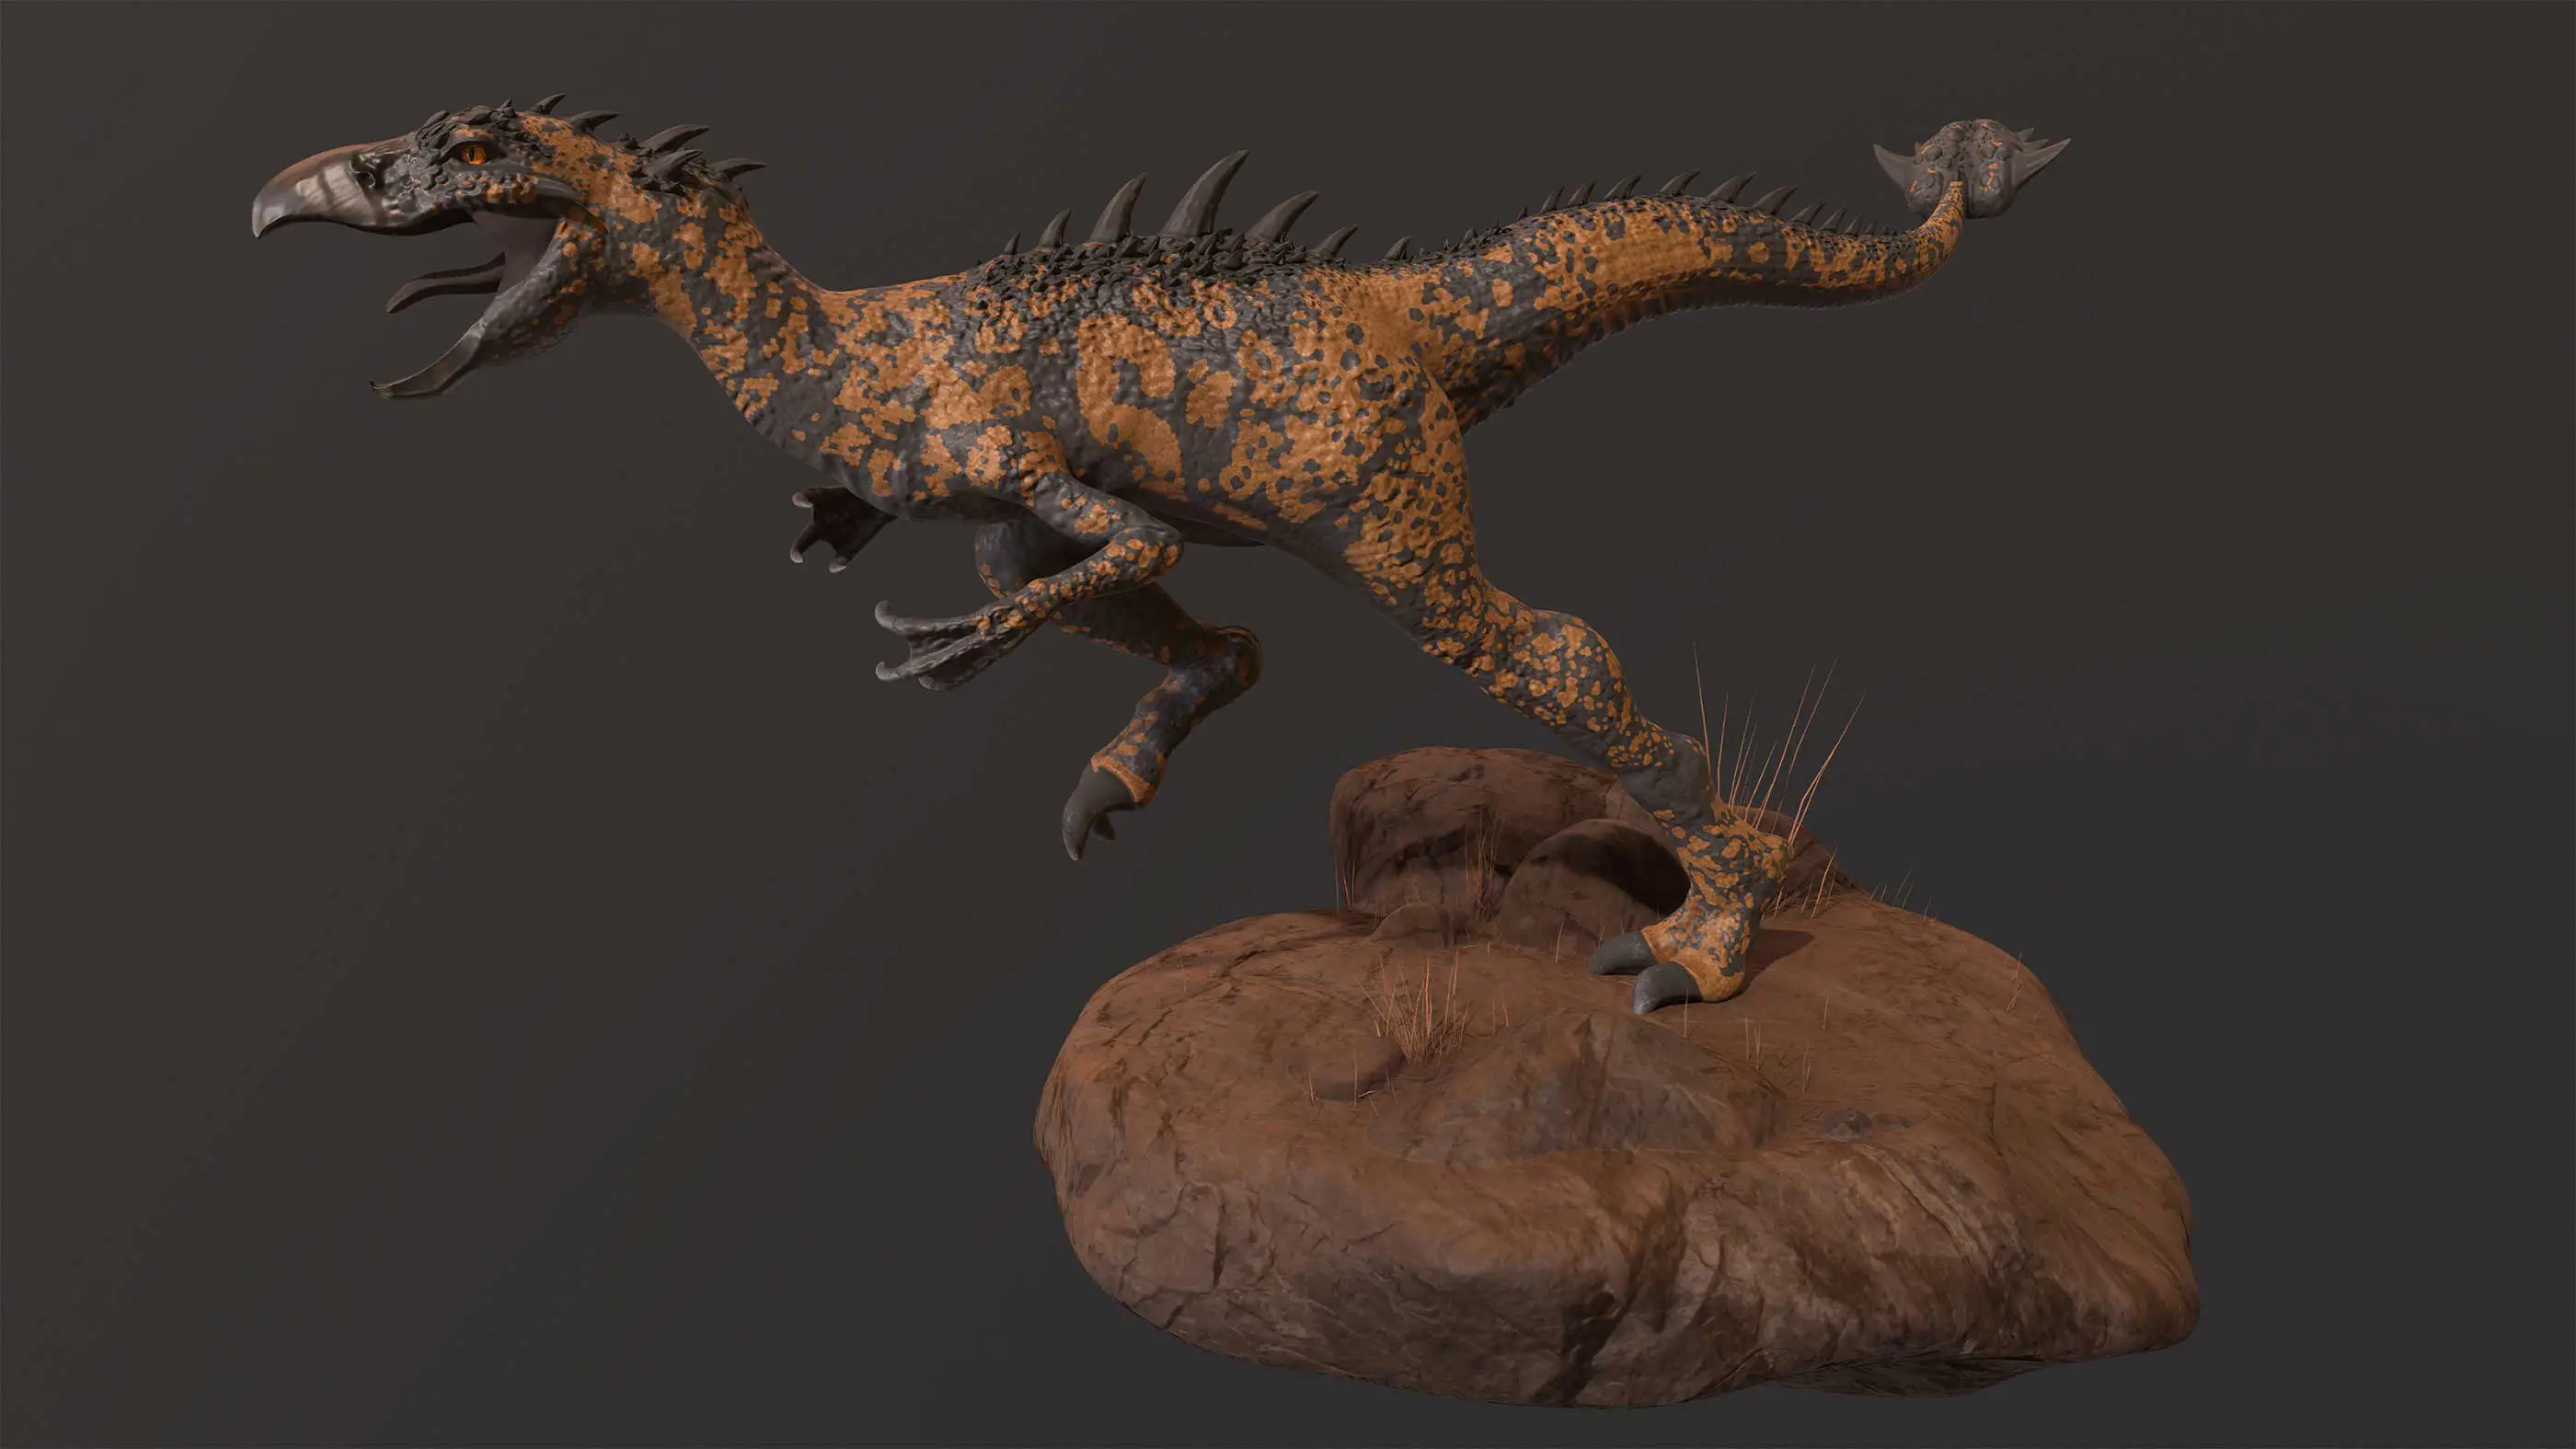 A 3D model of a dinosaur in an attacking pose.